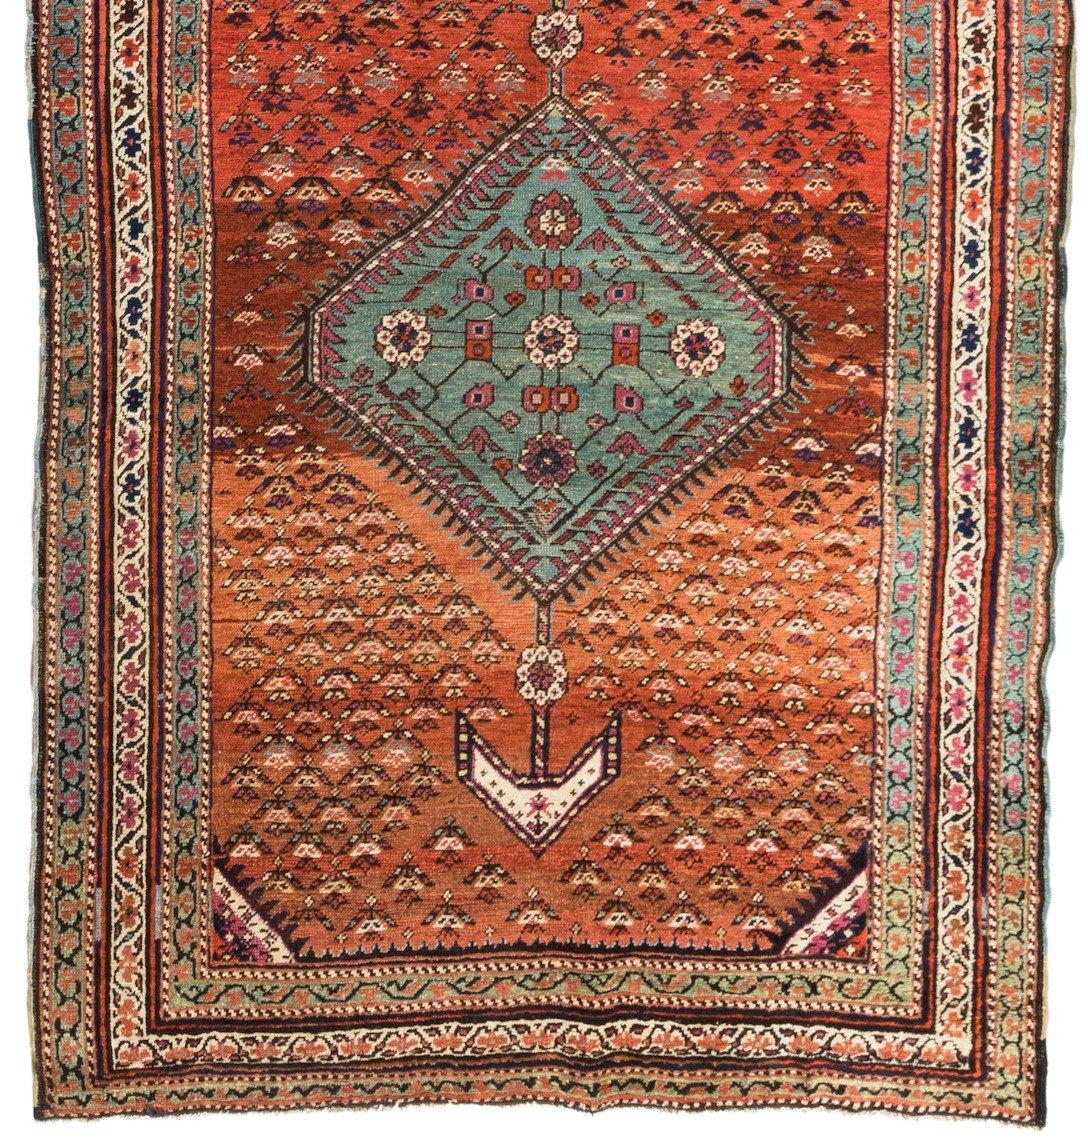 Hand-Woven Antique Caucasian Geometric Rust and Blue Karabagh Runner Rug circa 1900-1910s For Sale